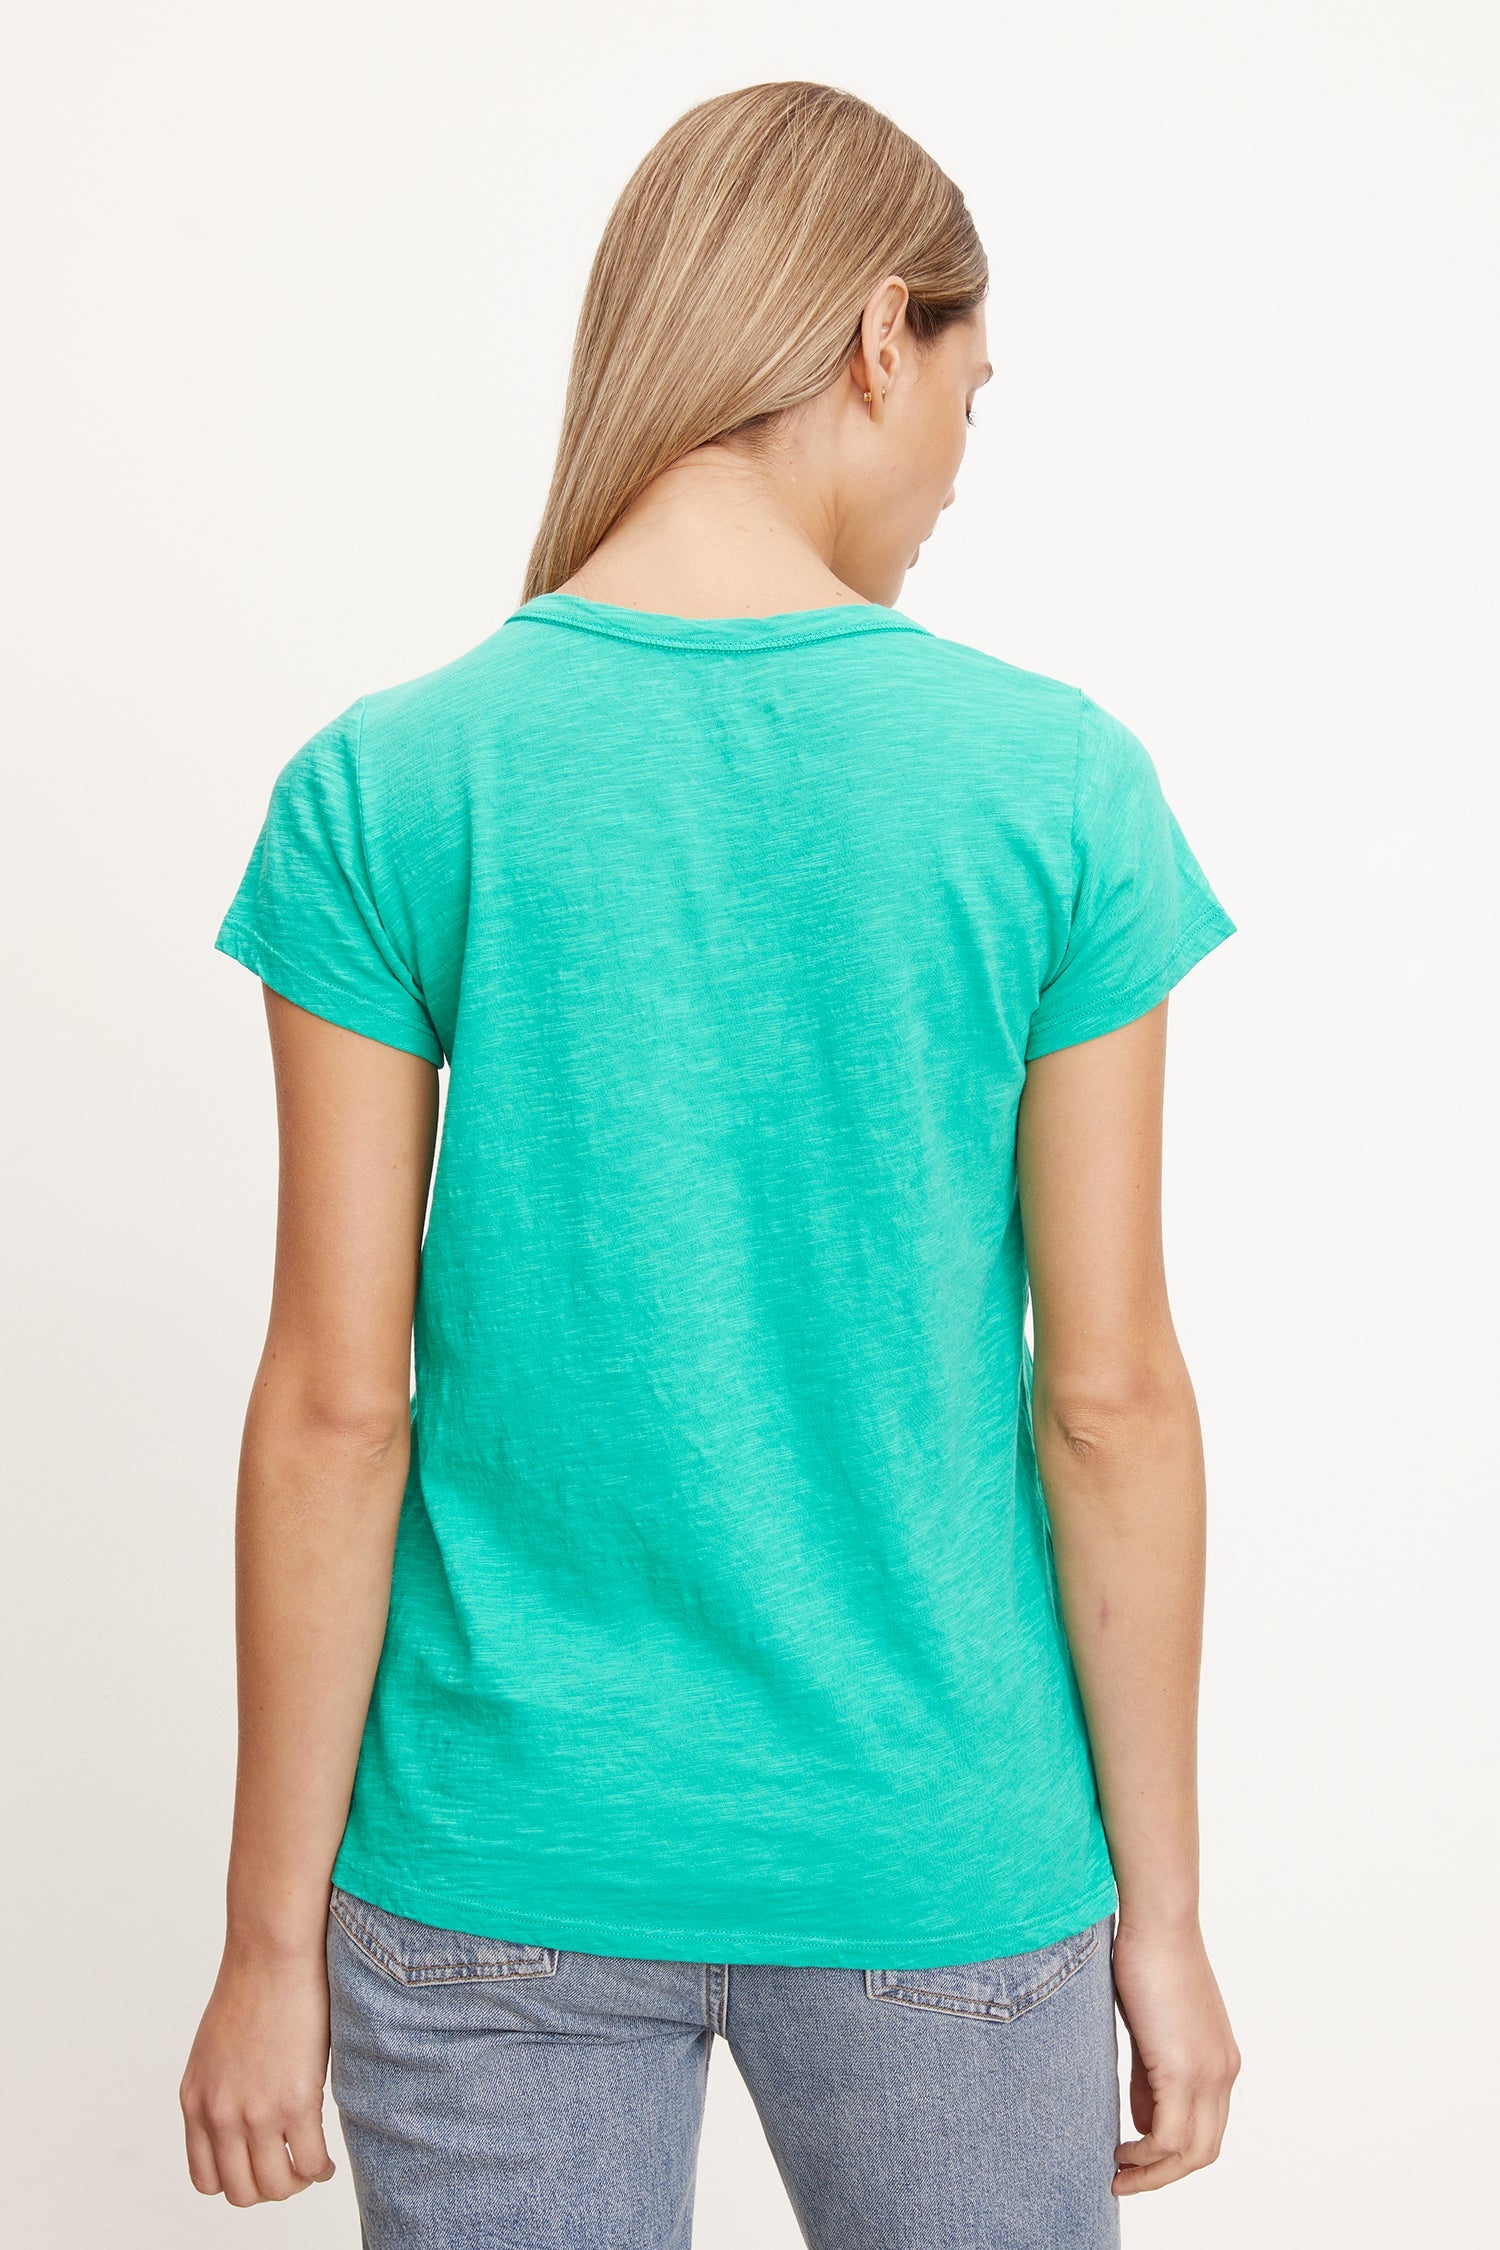 Velvet Tilly Tee - Beetle Clothing - Tops - Shirts - SS Knits by Velvet | Grace the Boutique